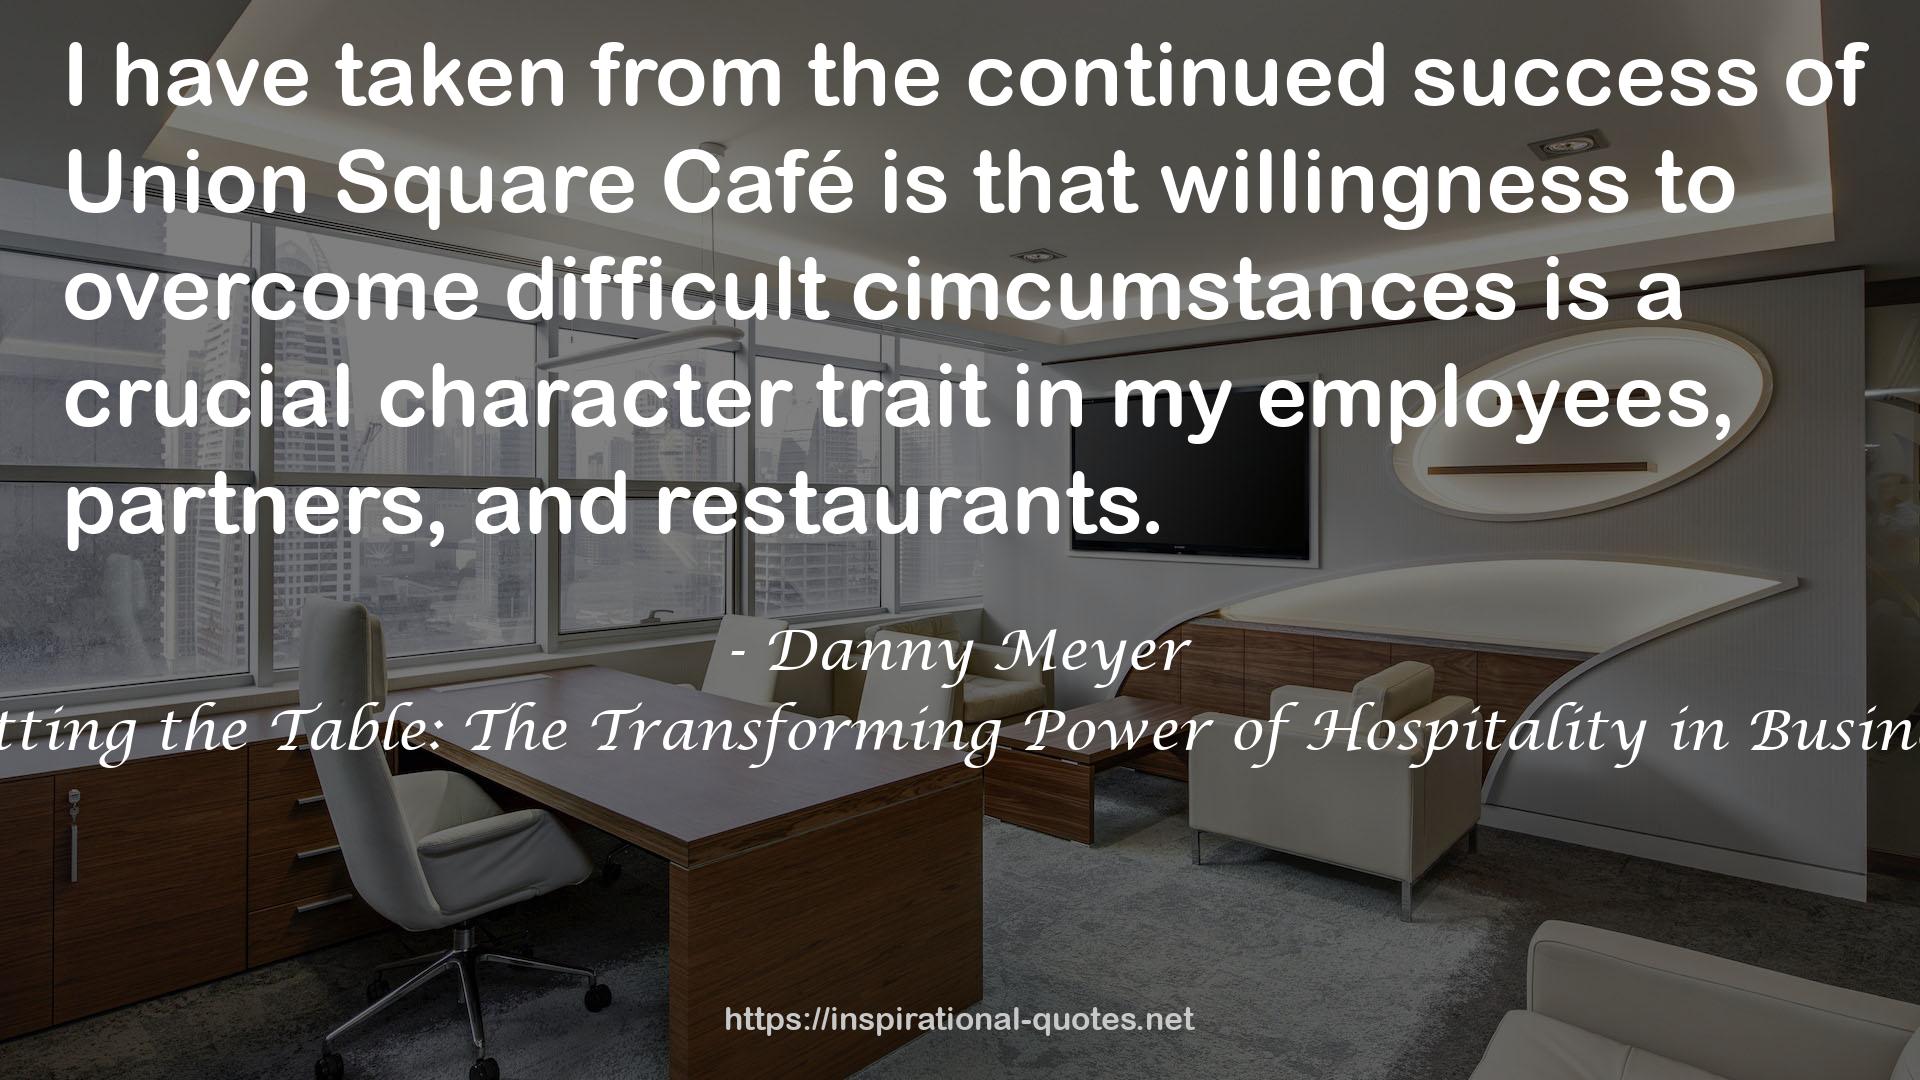 Setting the Table: The Transforming Power of Hospitality in Business QUOTES